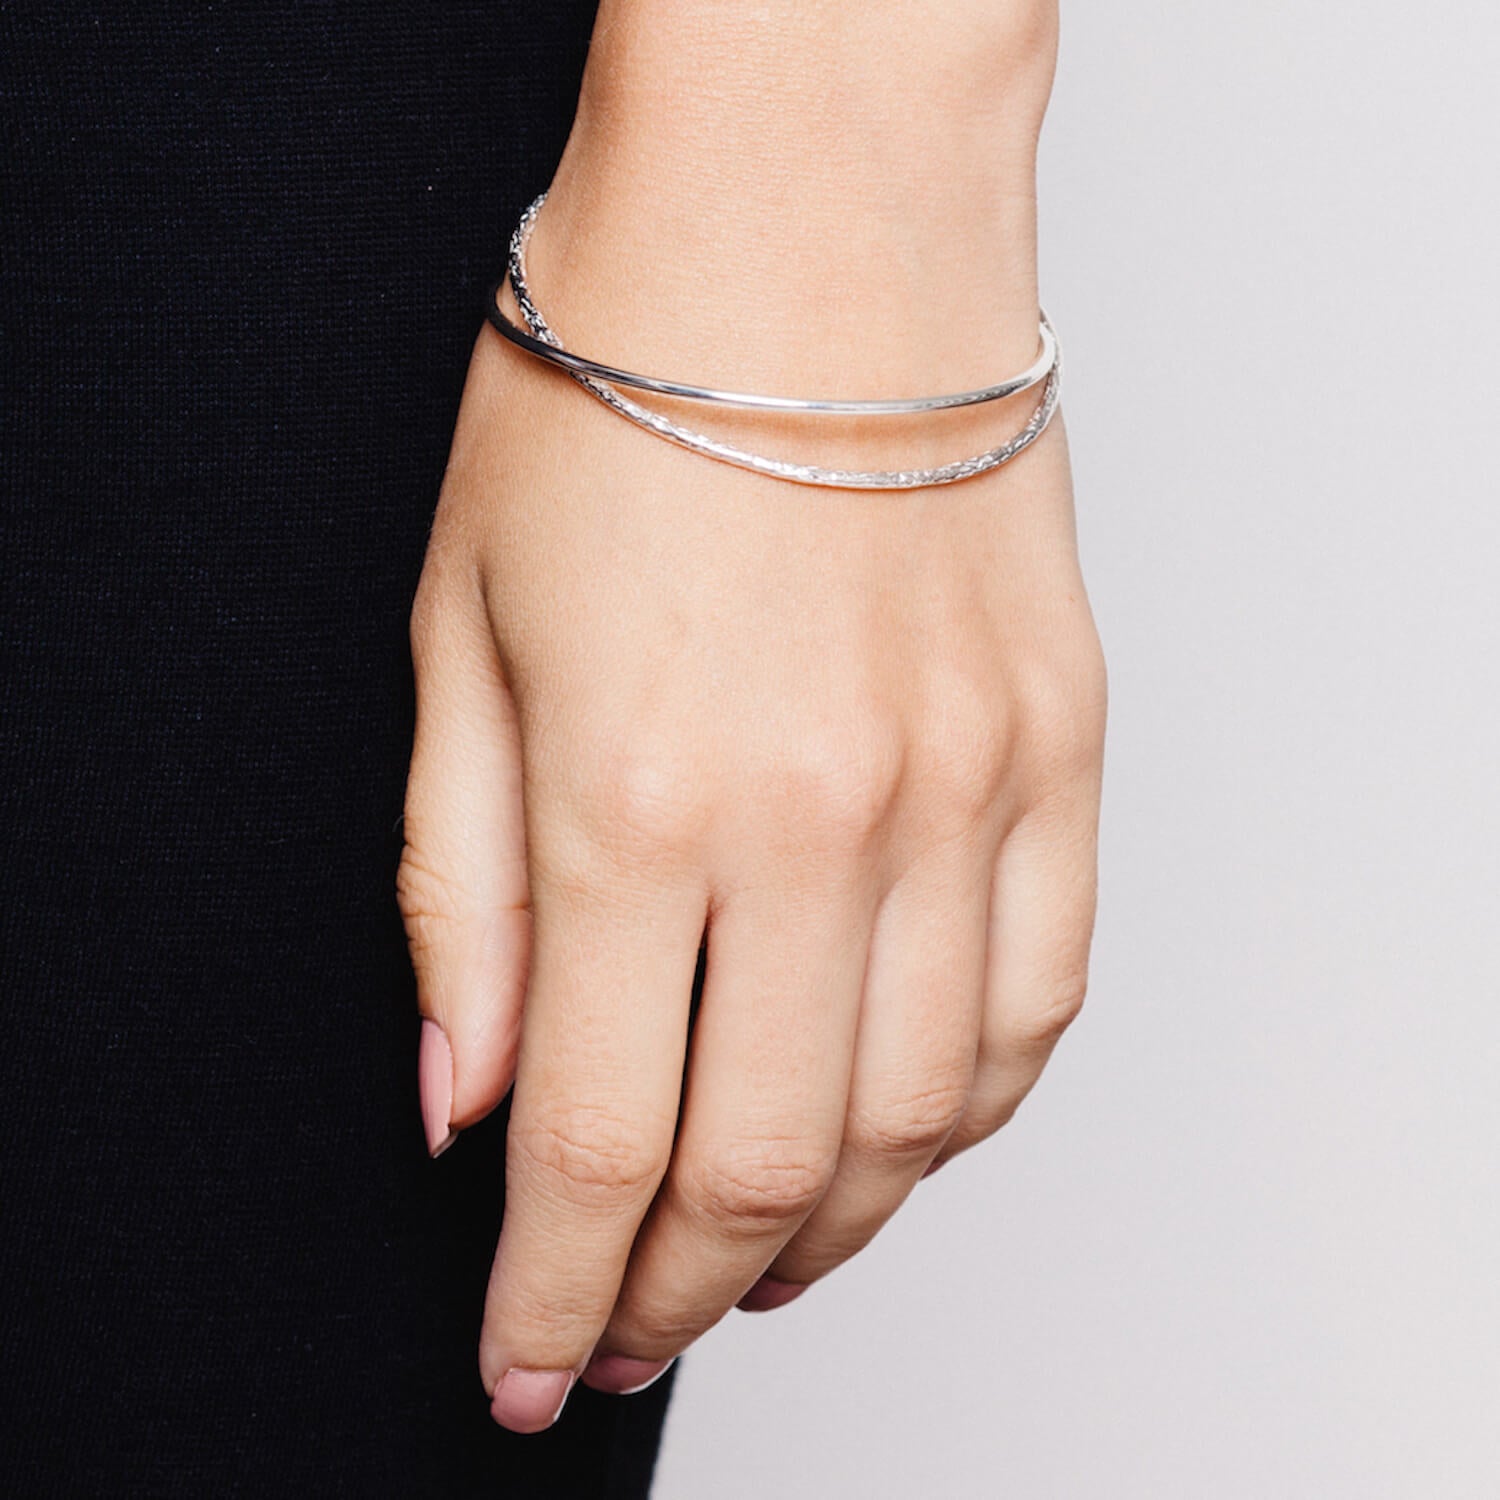 Close up of model wearing intertwined silver bangles